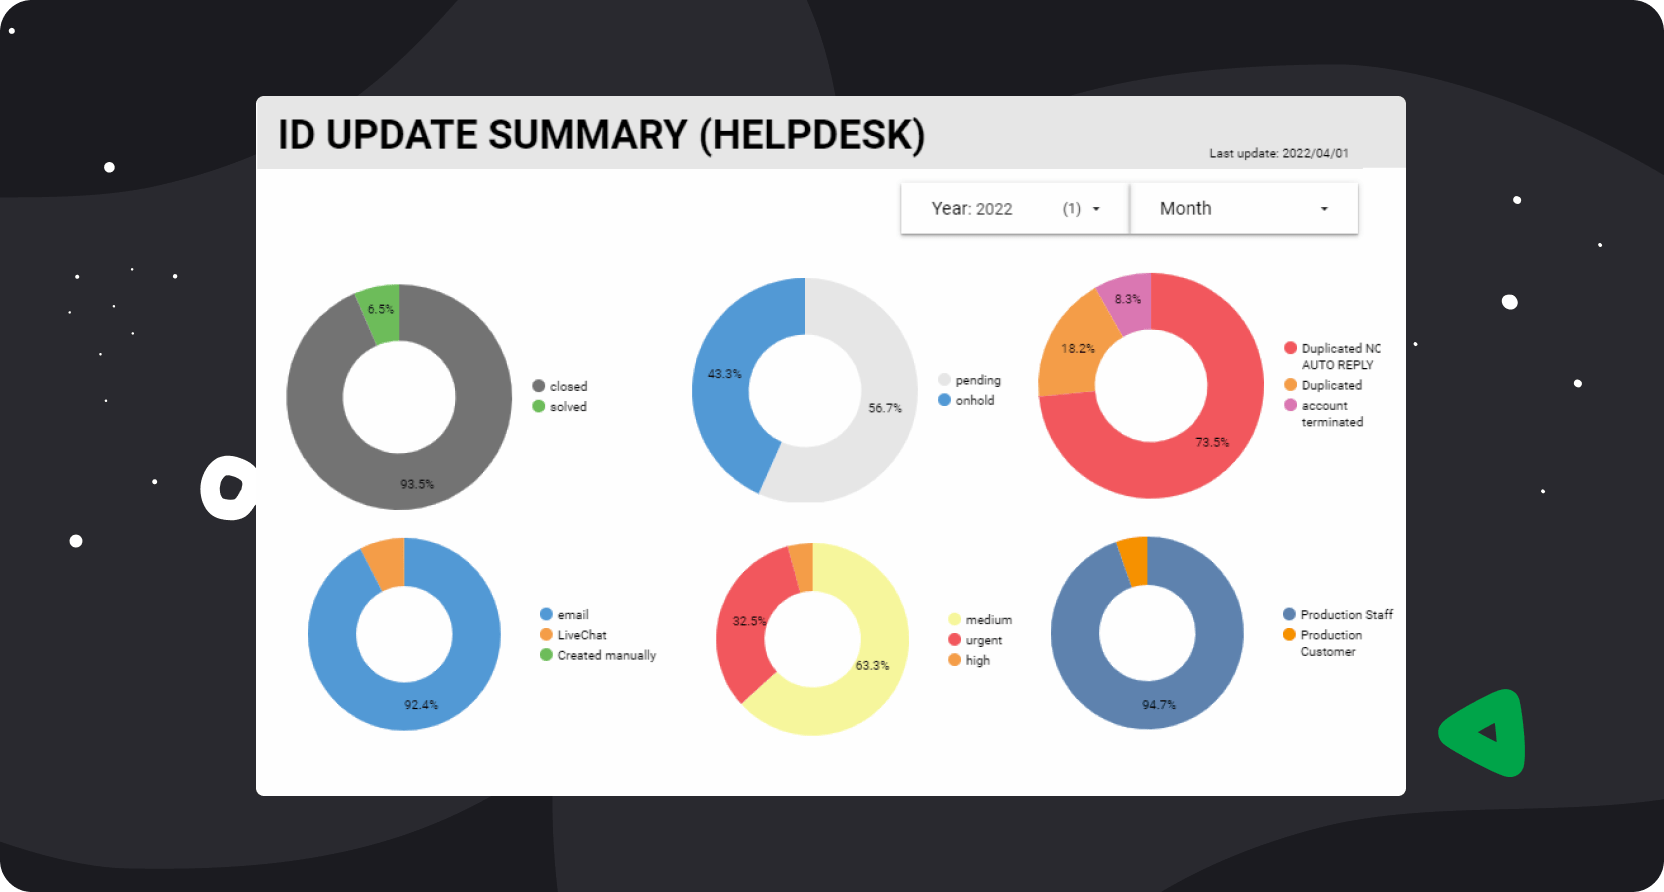 Customer data with the ID Update Summary created by Brastel.